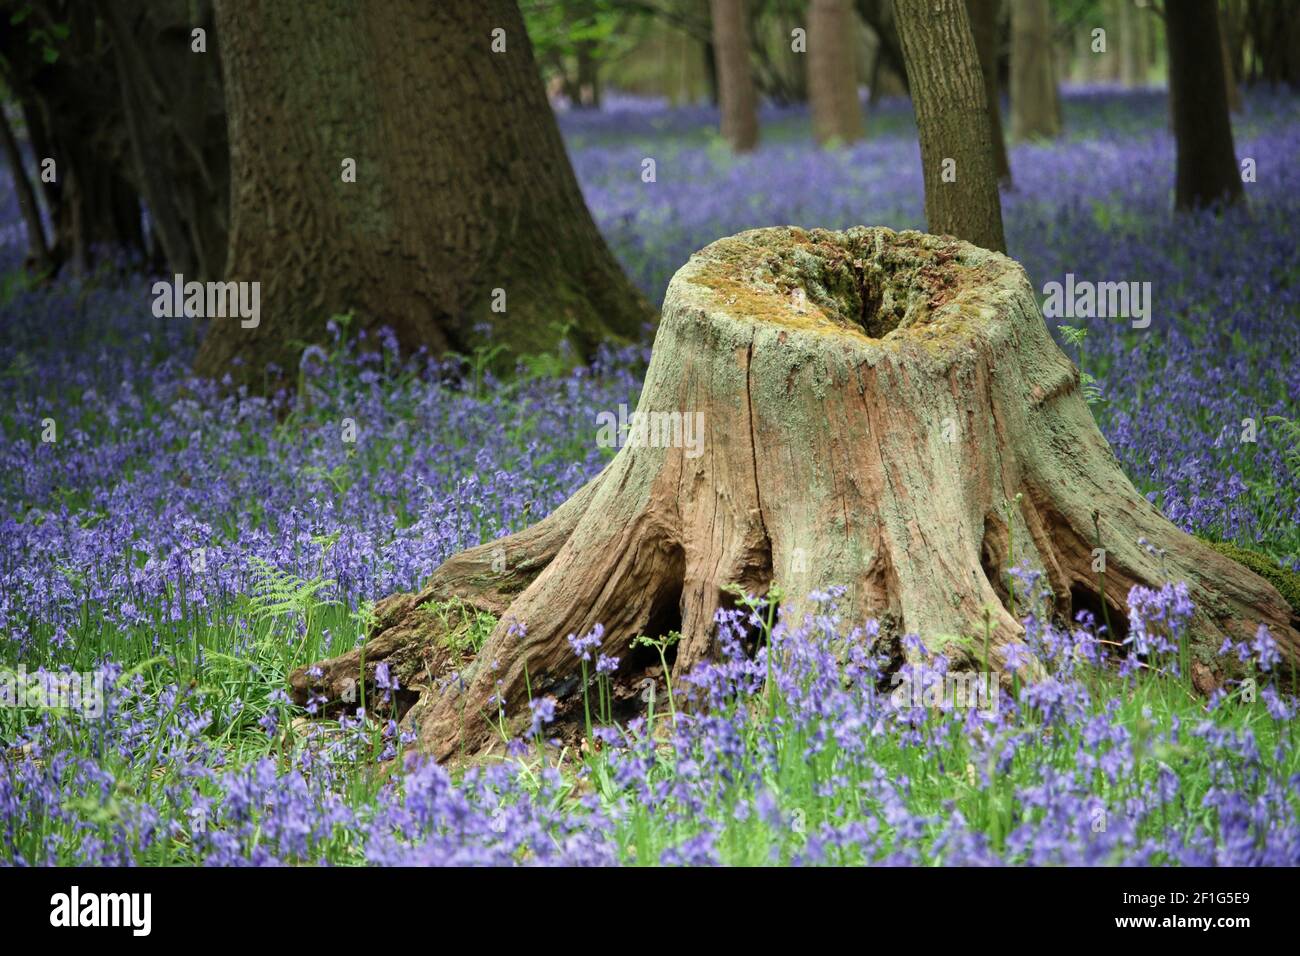 Spring bluebell, Hyacinthoides non scripta, wood with large hollow tree stump with lichens in foreground and trees blurred in background. Stock Photo